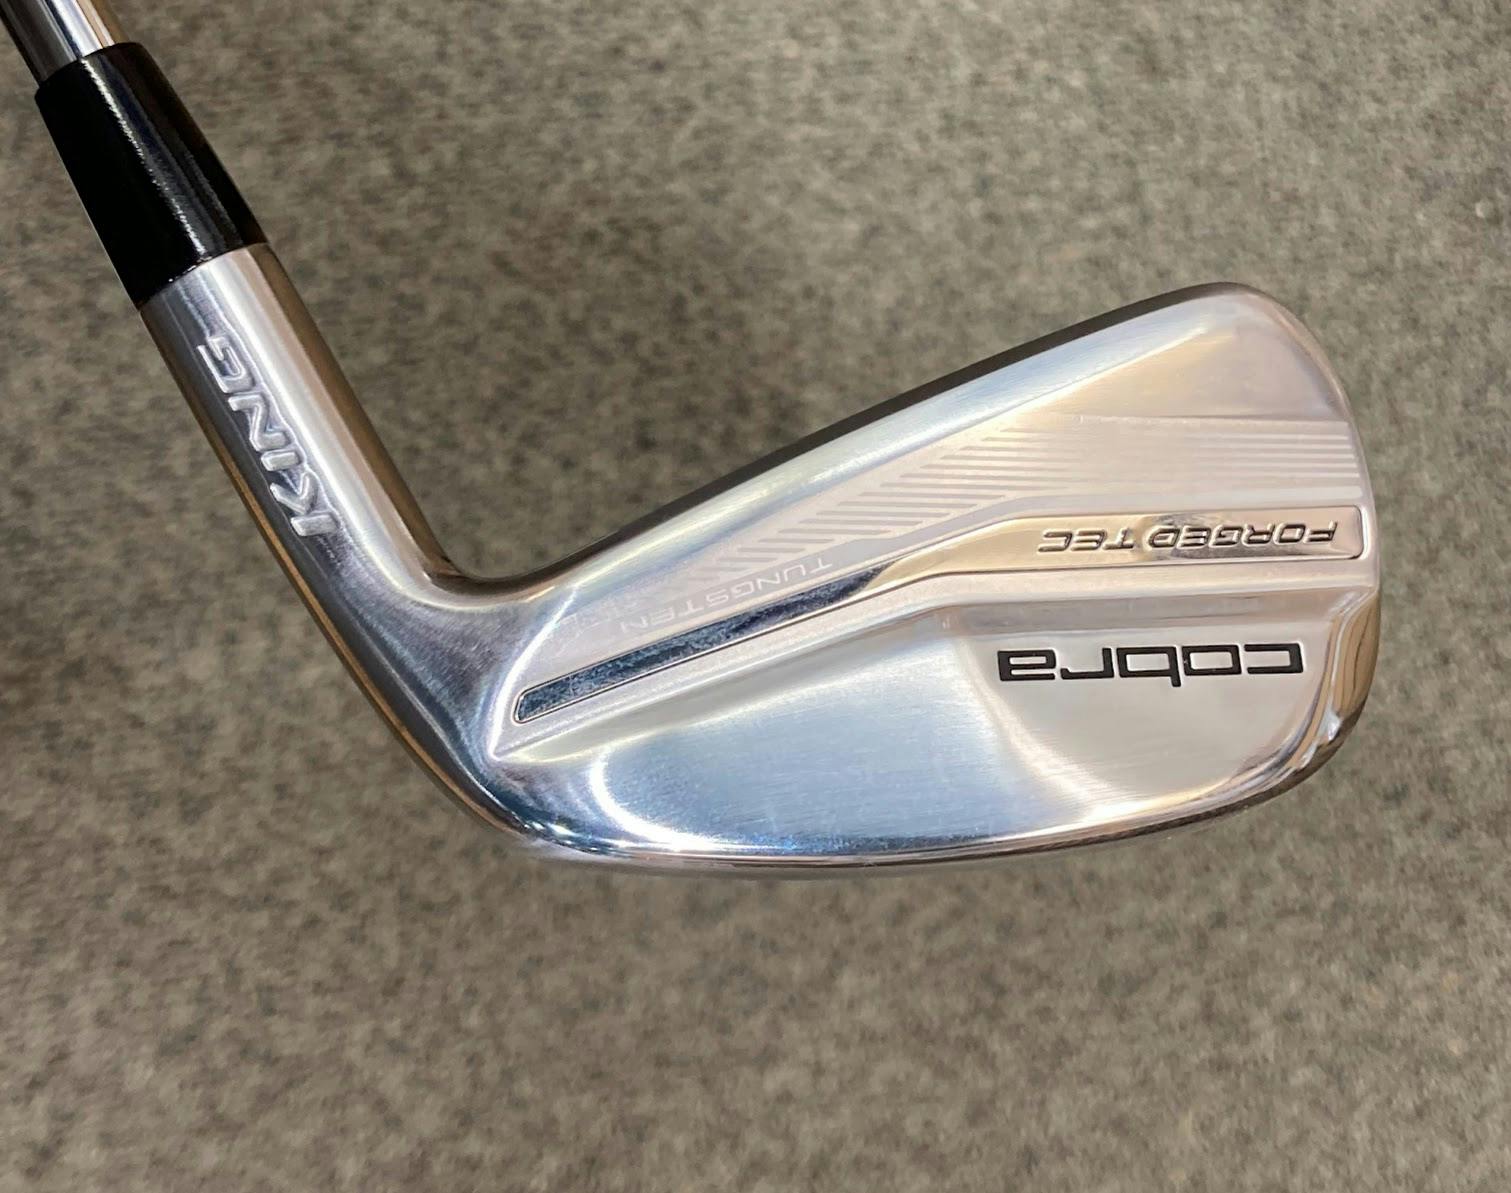 Cobra King Forged TEC ONE Length Iron Review 